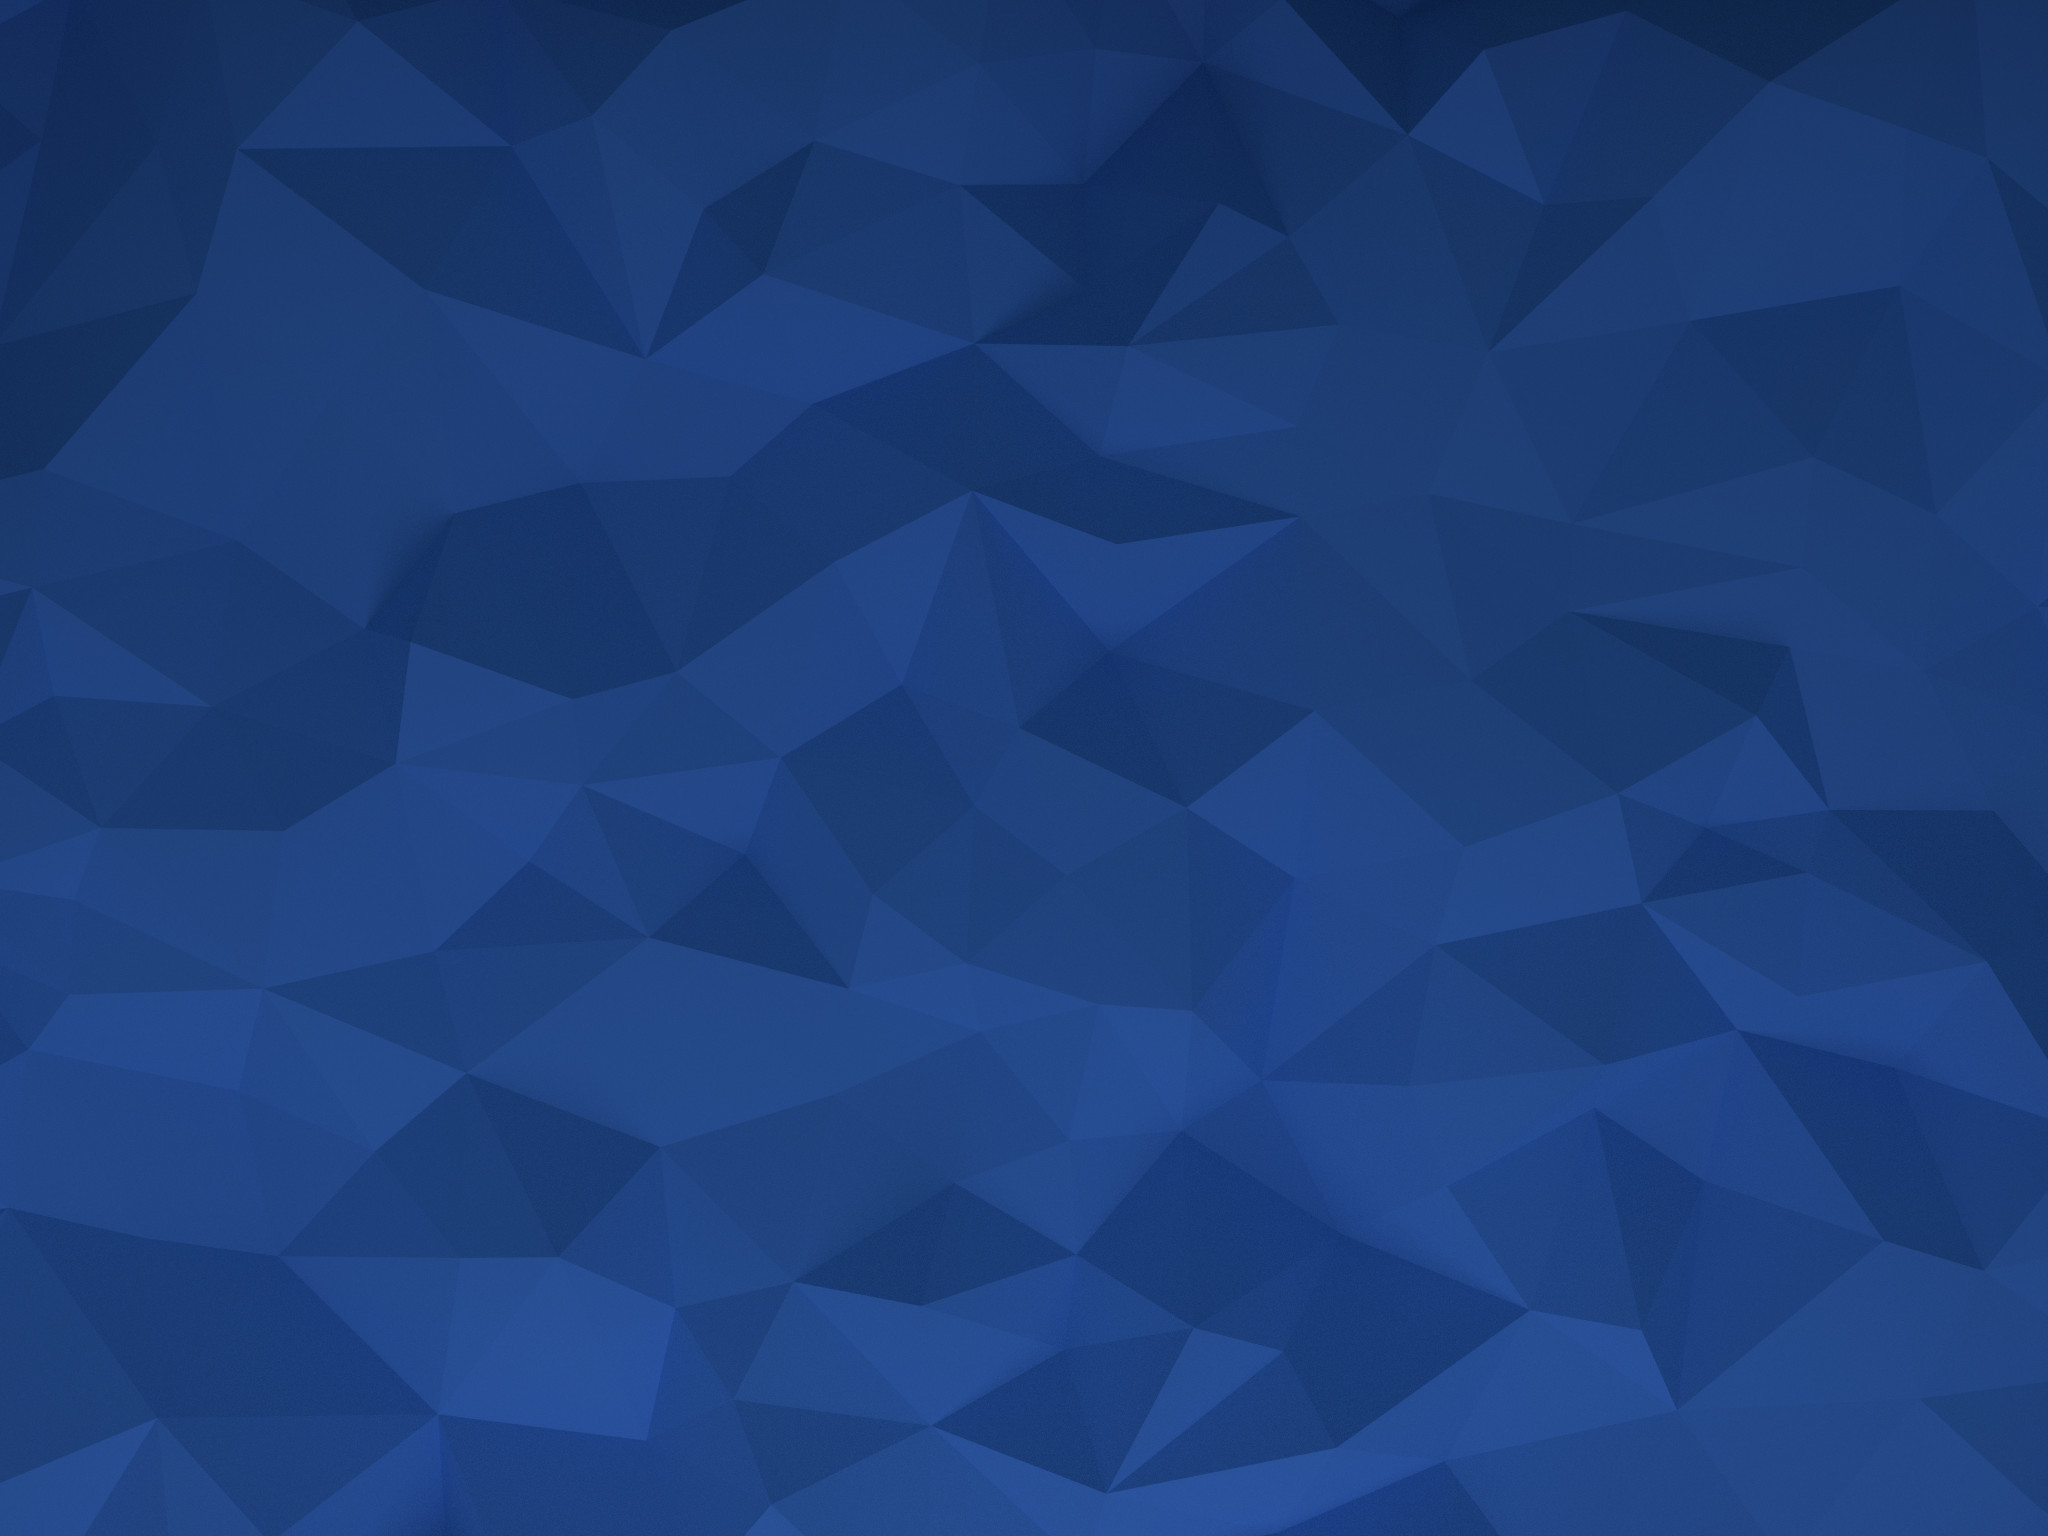 Fedora Linux Wallpaper (60+ pictures)